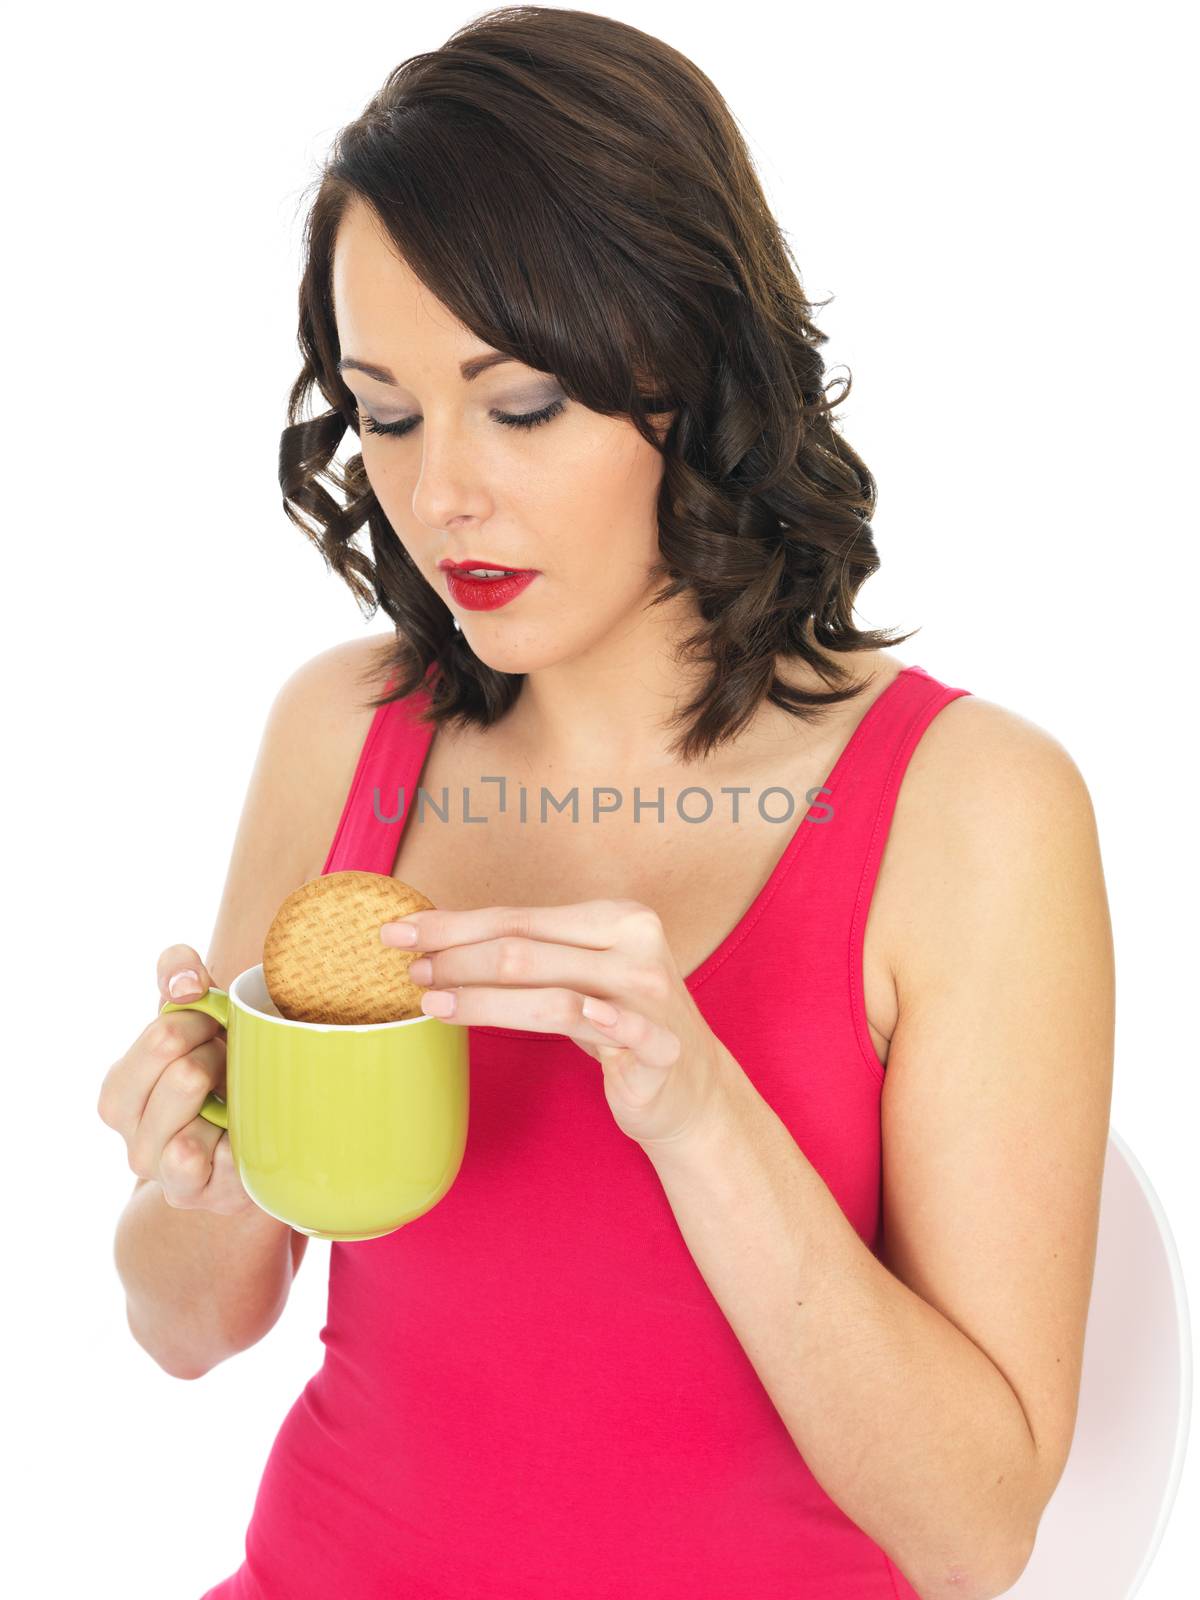 Attractive Young Woman With Tea and Biscuits